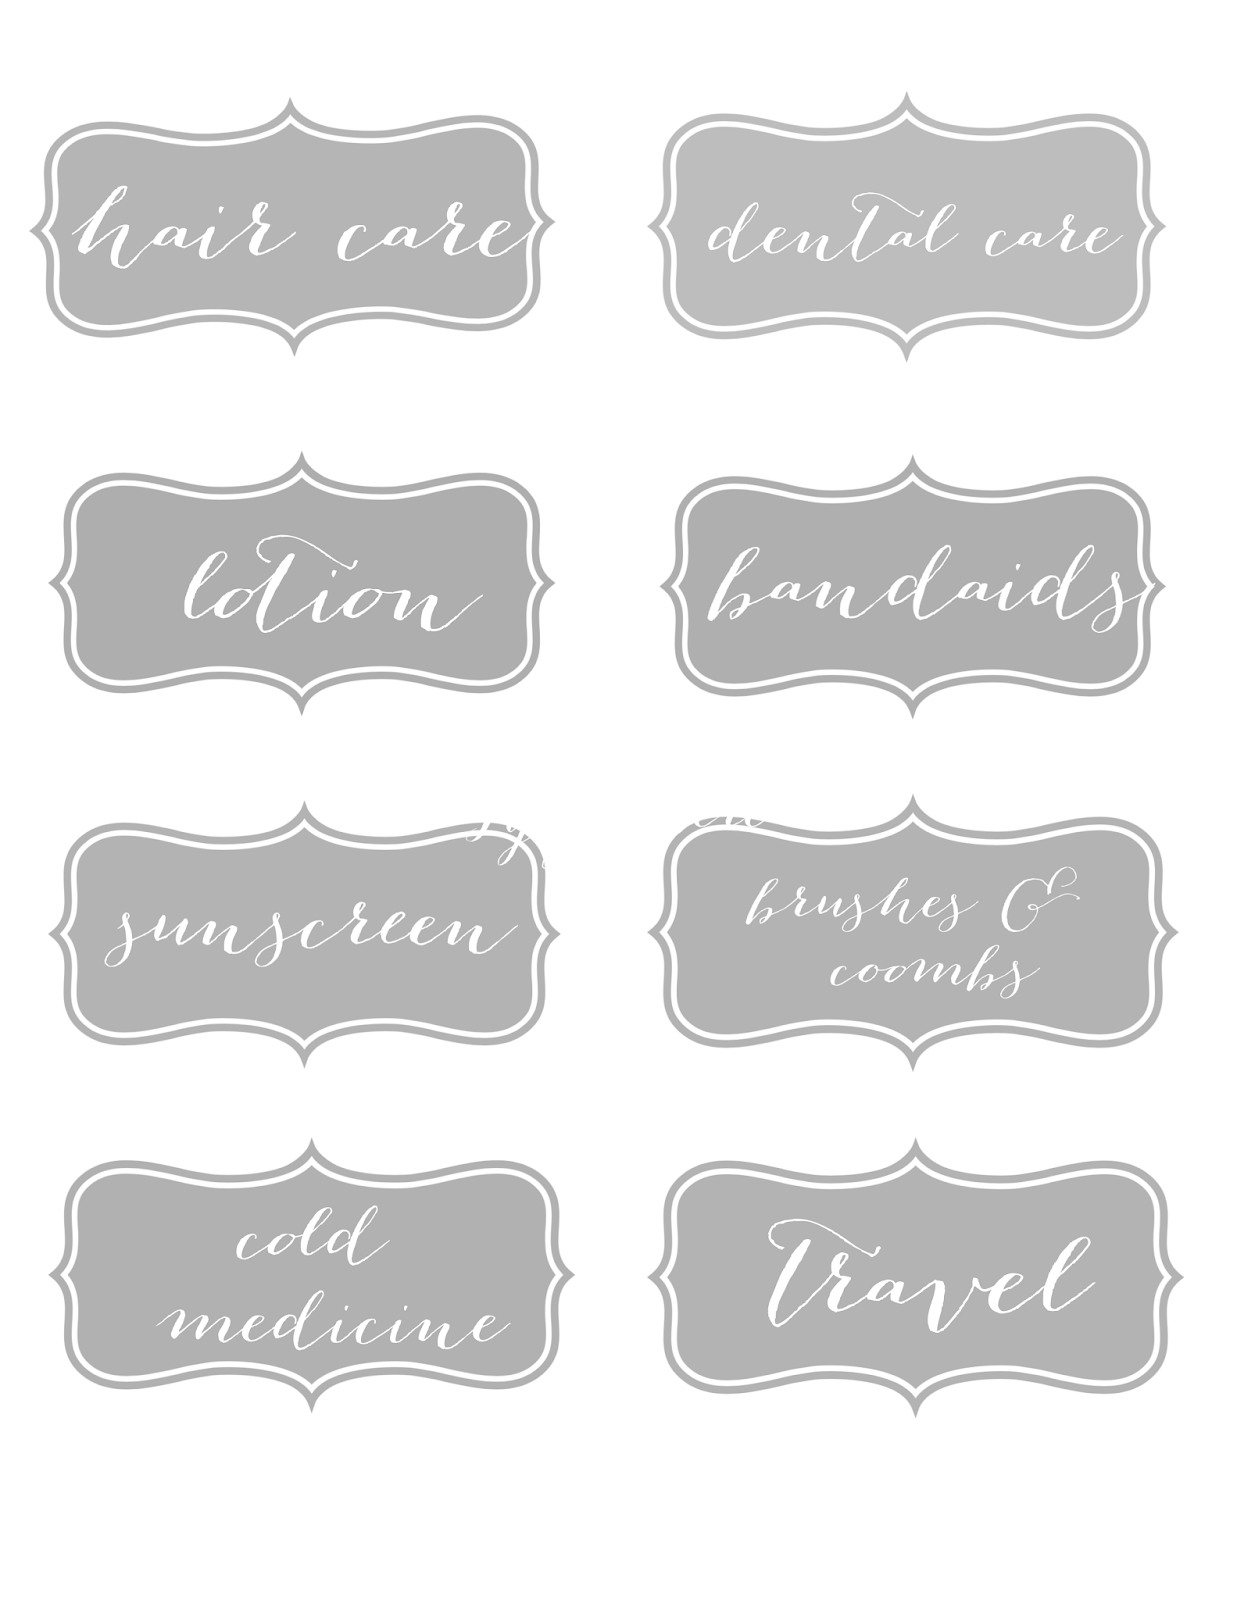 Free Printable Labels Templates